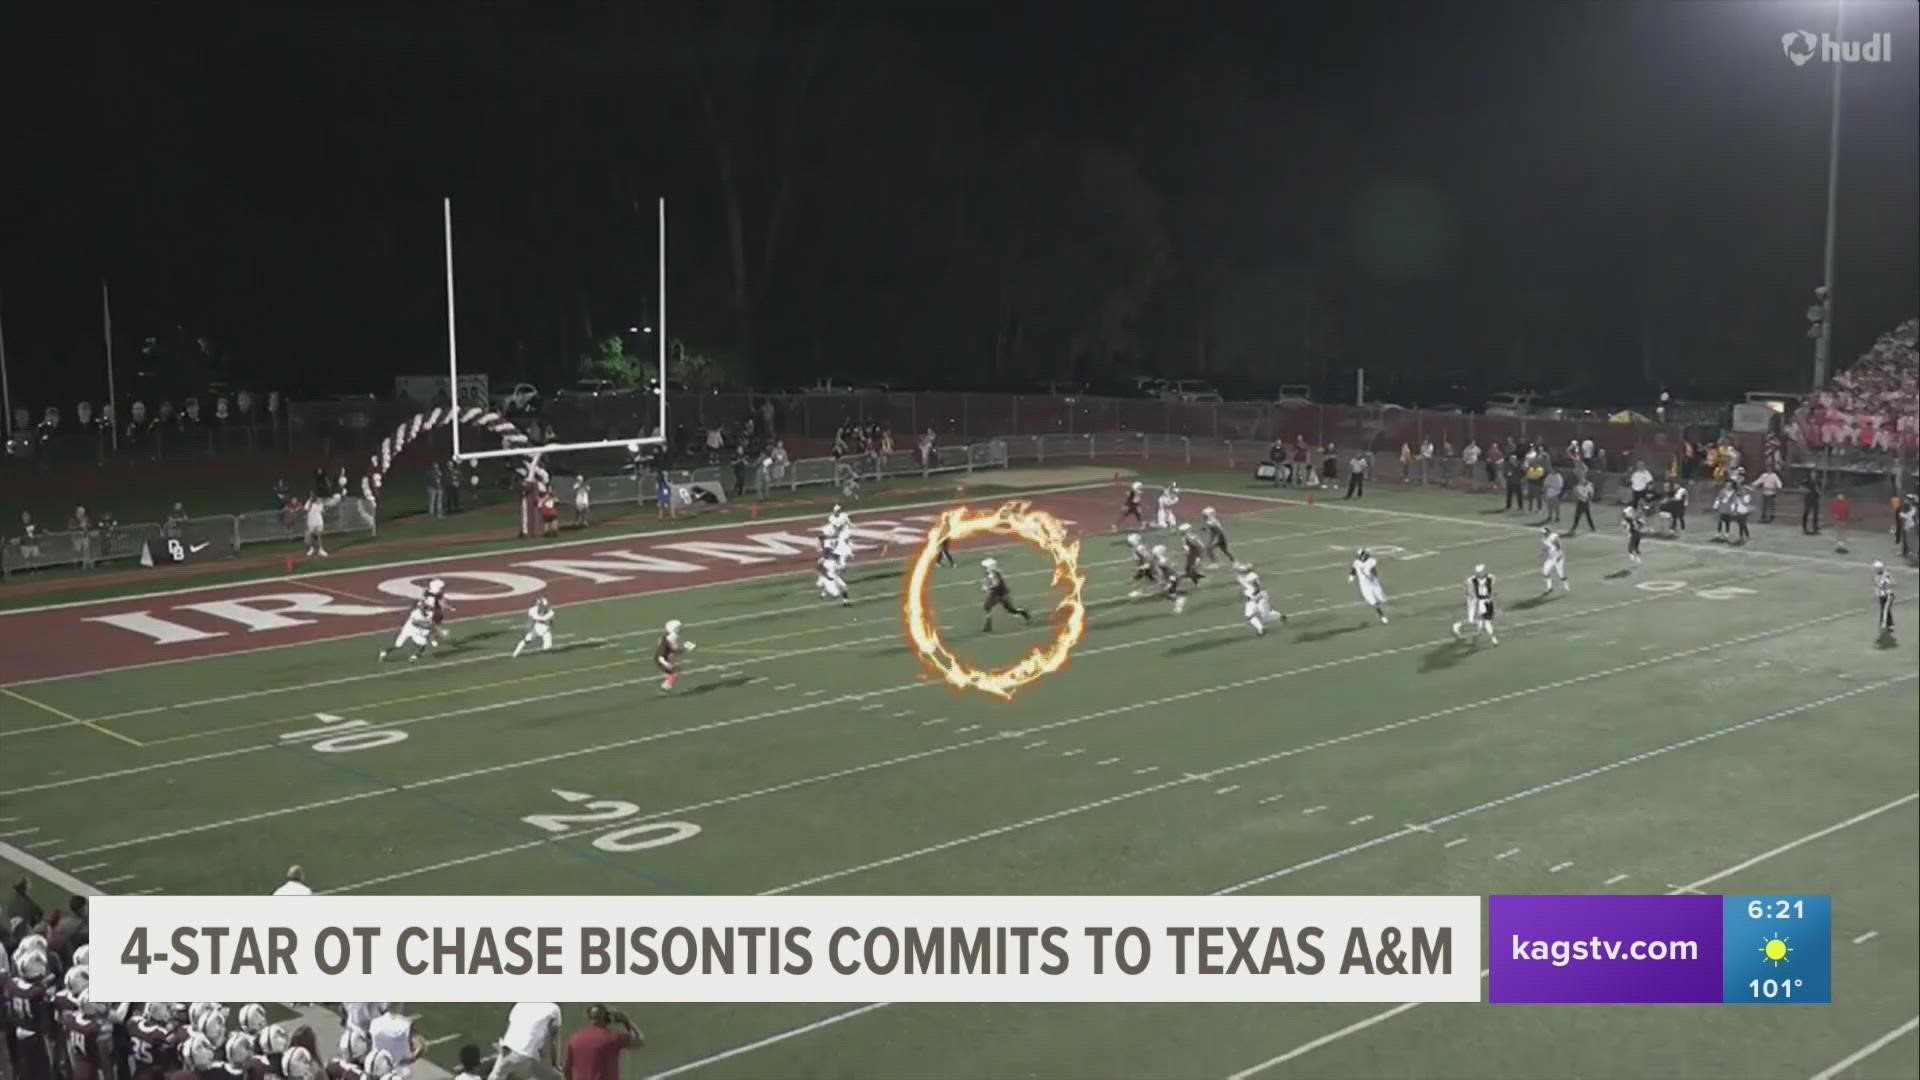 Bisontis, who is rated as a Top-100 overall prospect, is the Aggies' 6th commitment for the 2023 recruiting class.